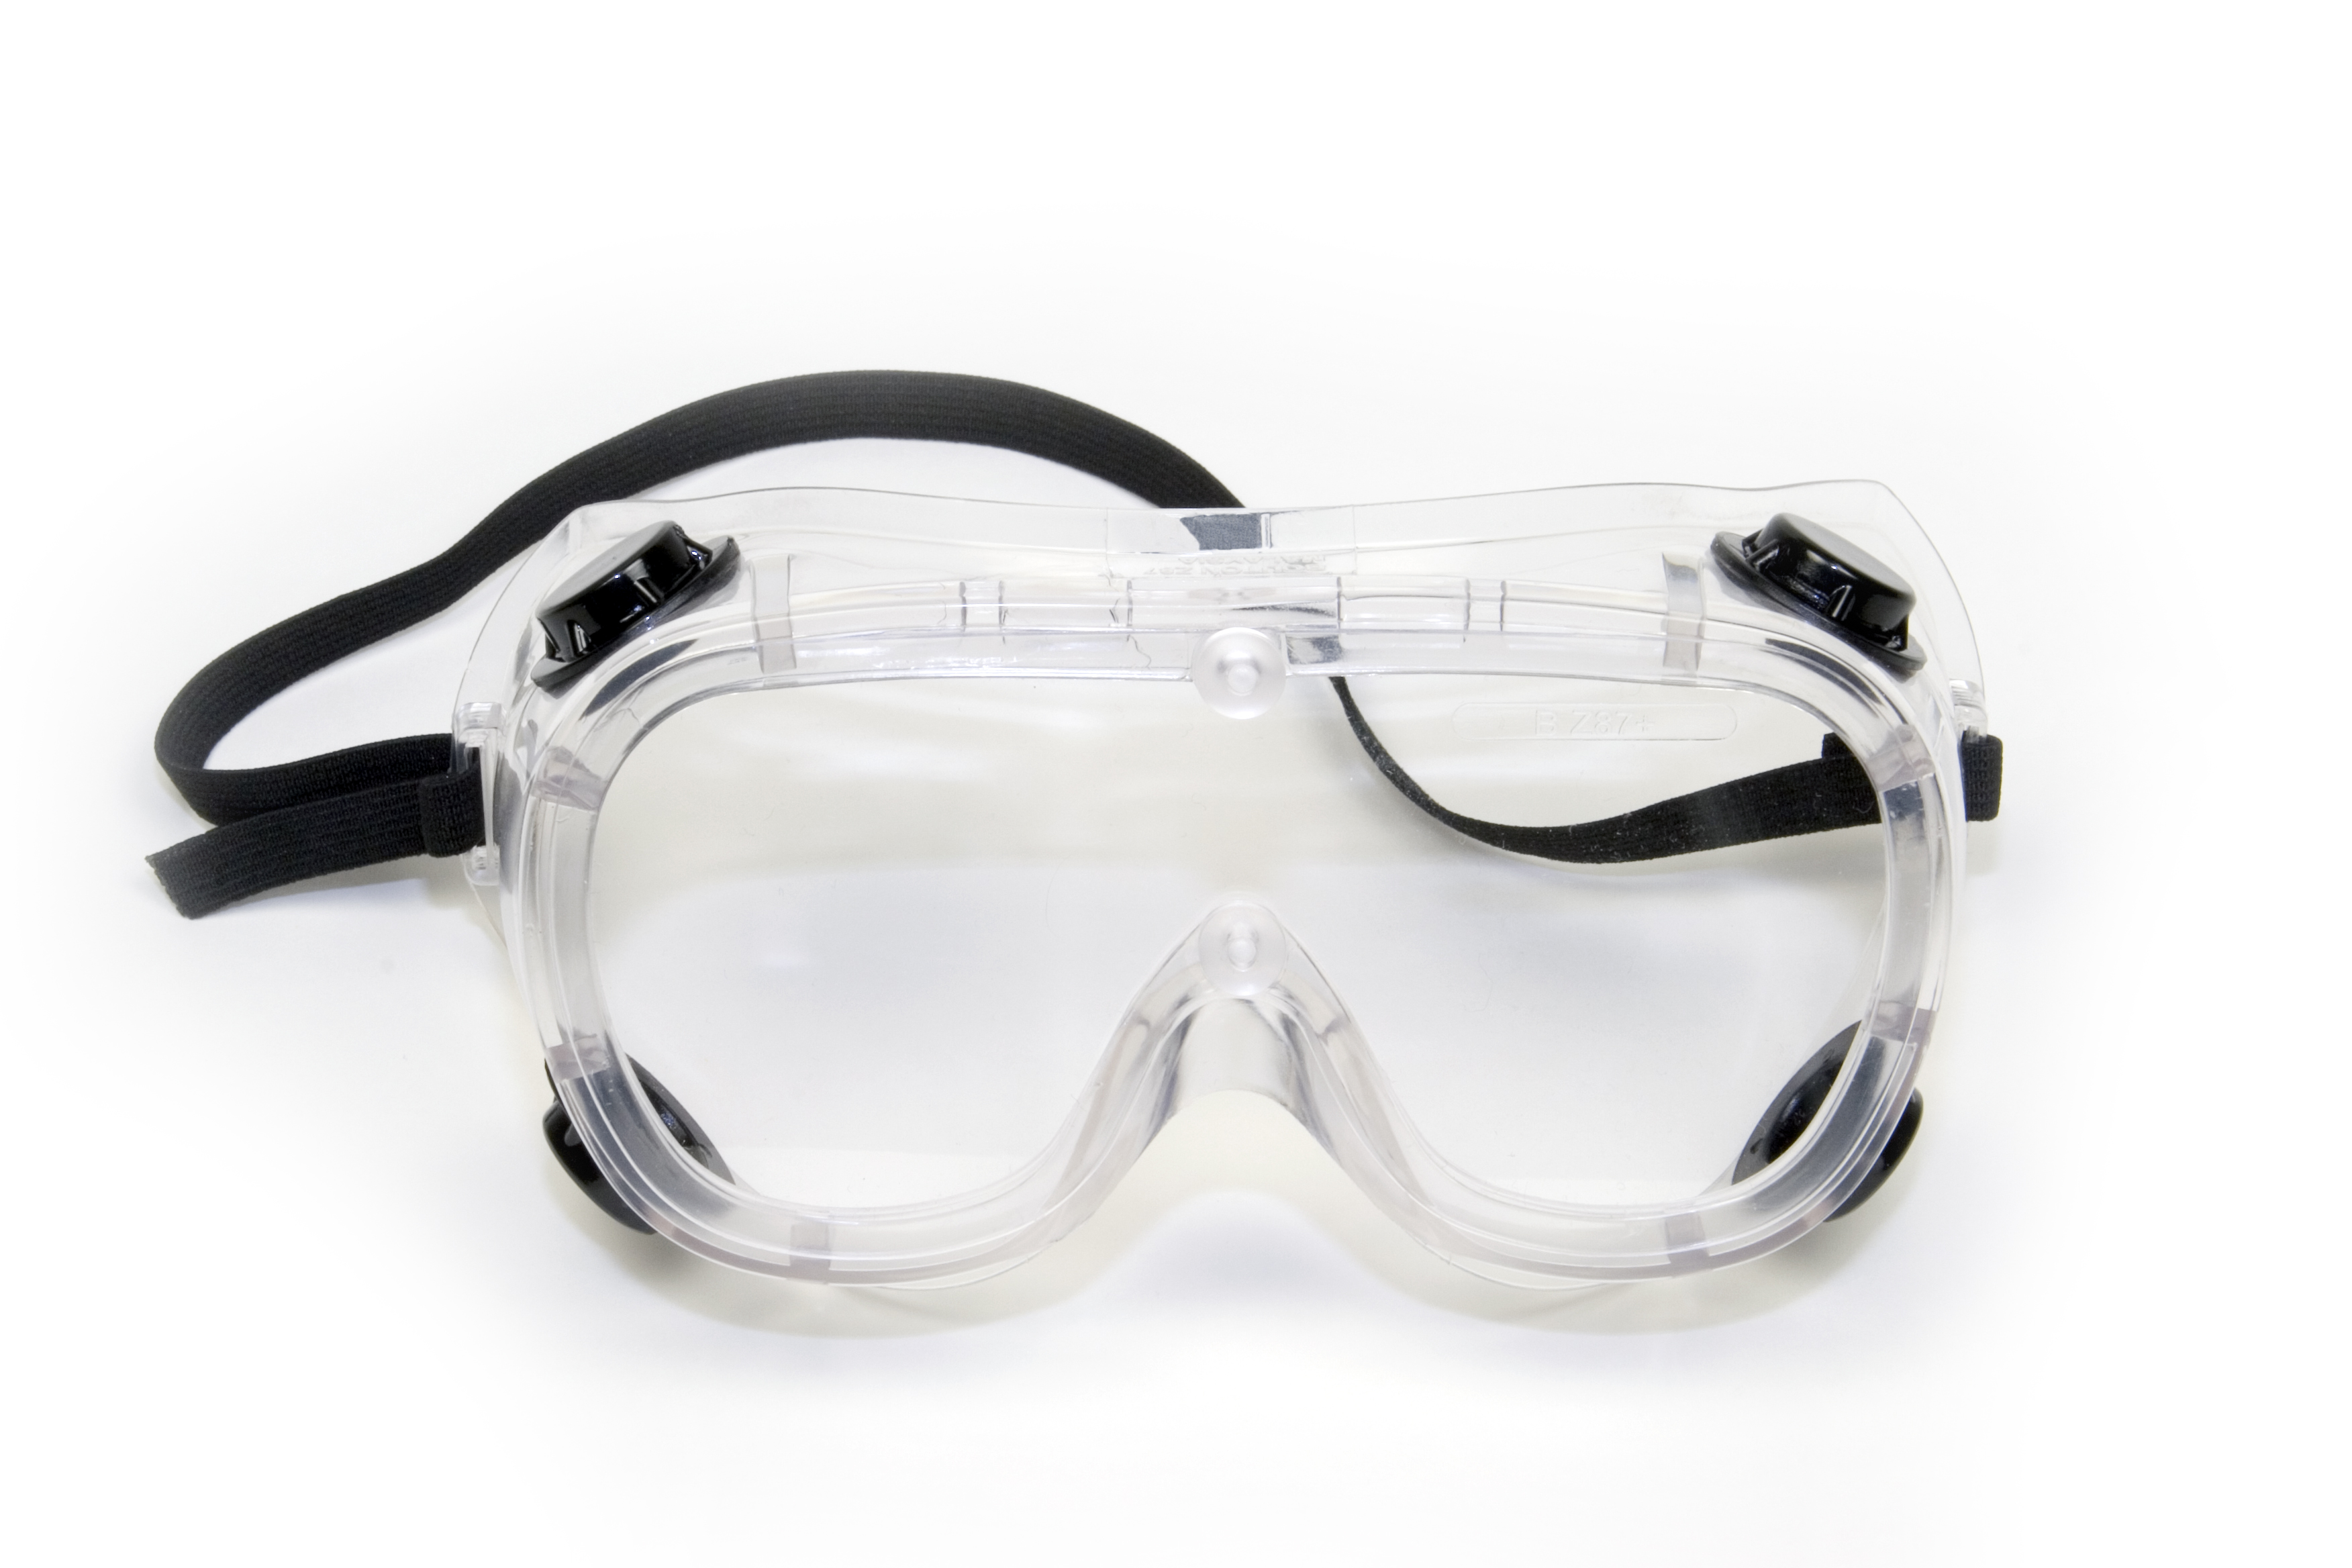 Medical Safety Goggles Online Cpr And First Aid Certification Courses